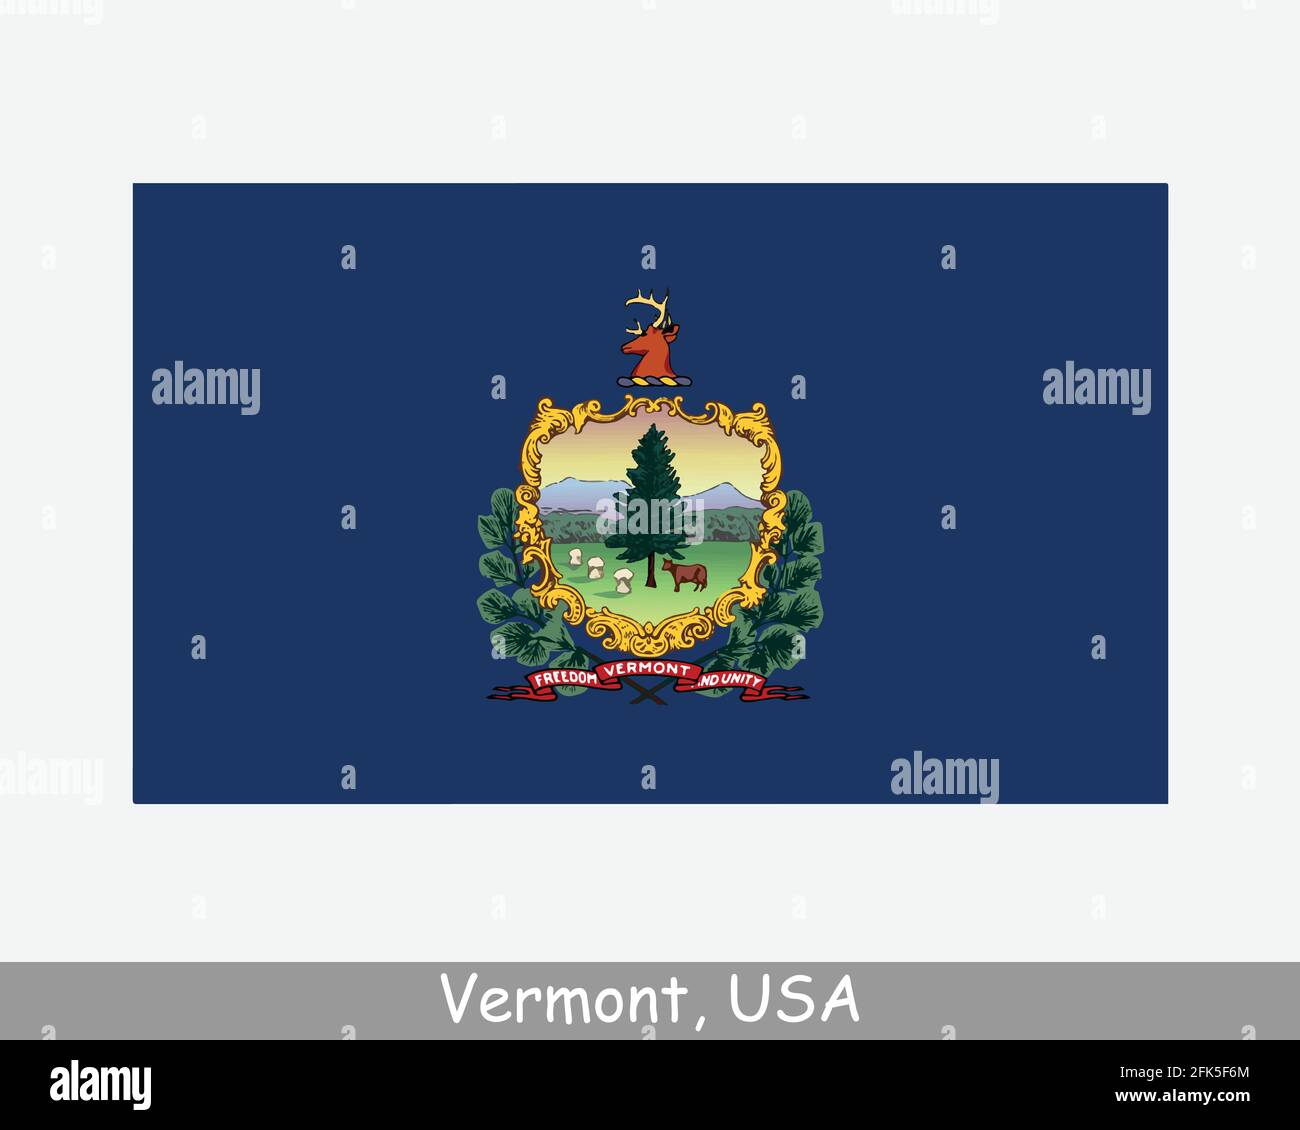 Vermont USA State Flag. Flag of VT, USA isolated on white background. United States, America, American, United States of America, US State. Vector ill Stock Vector